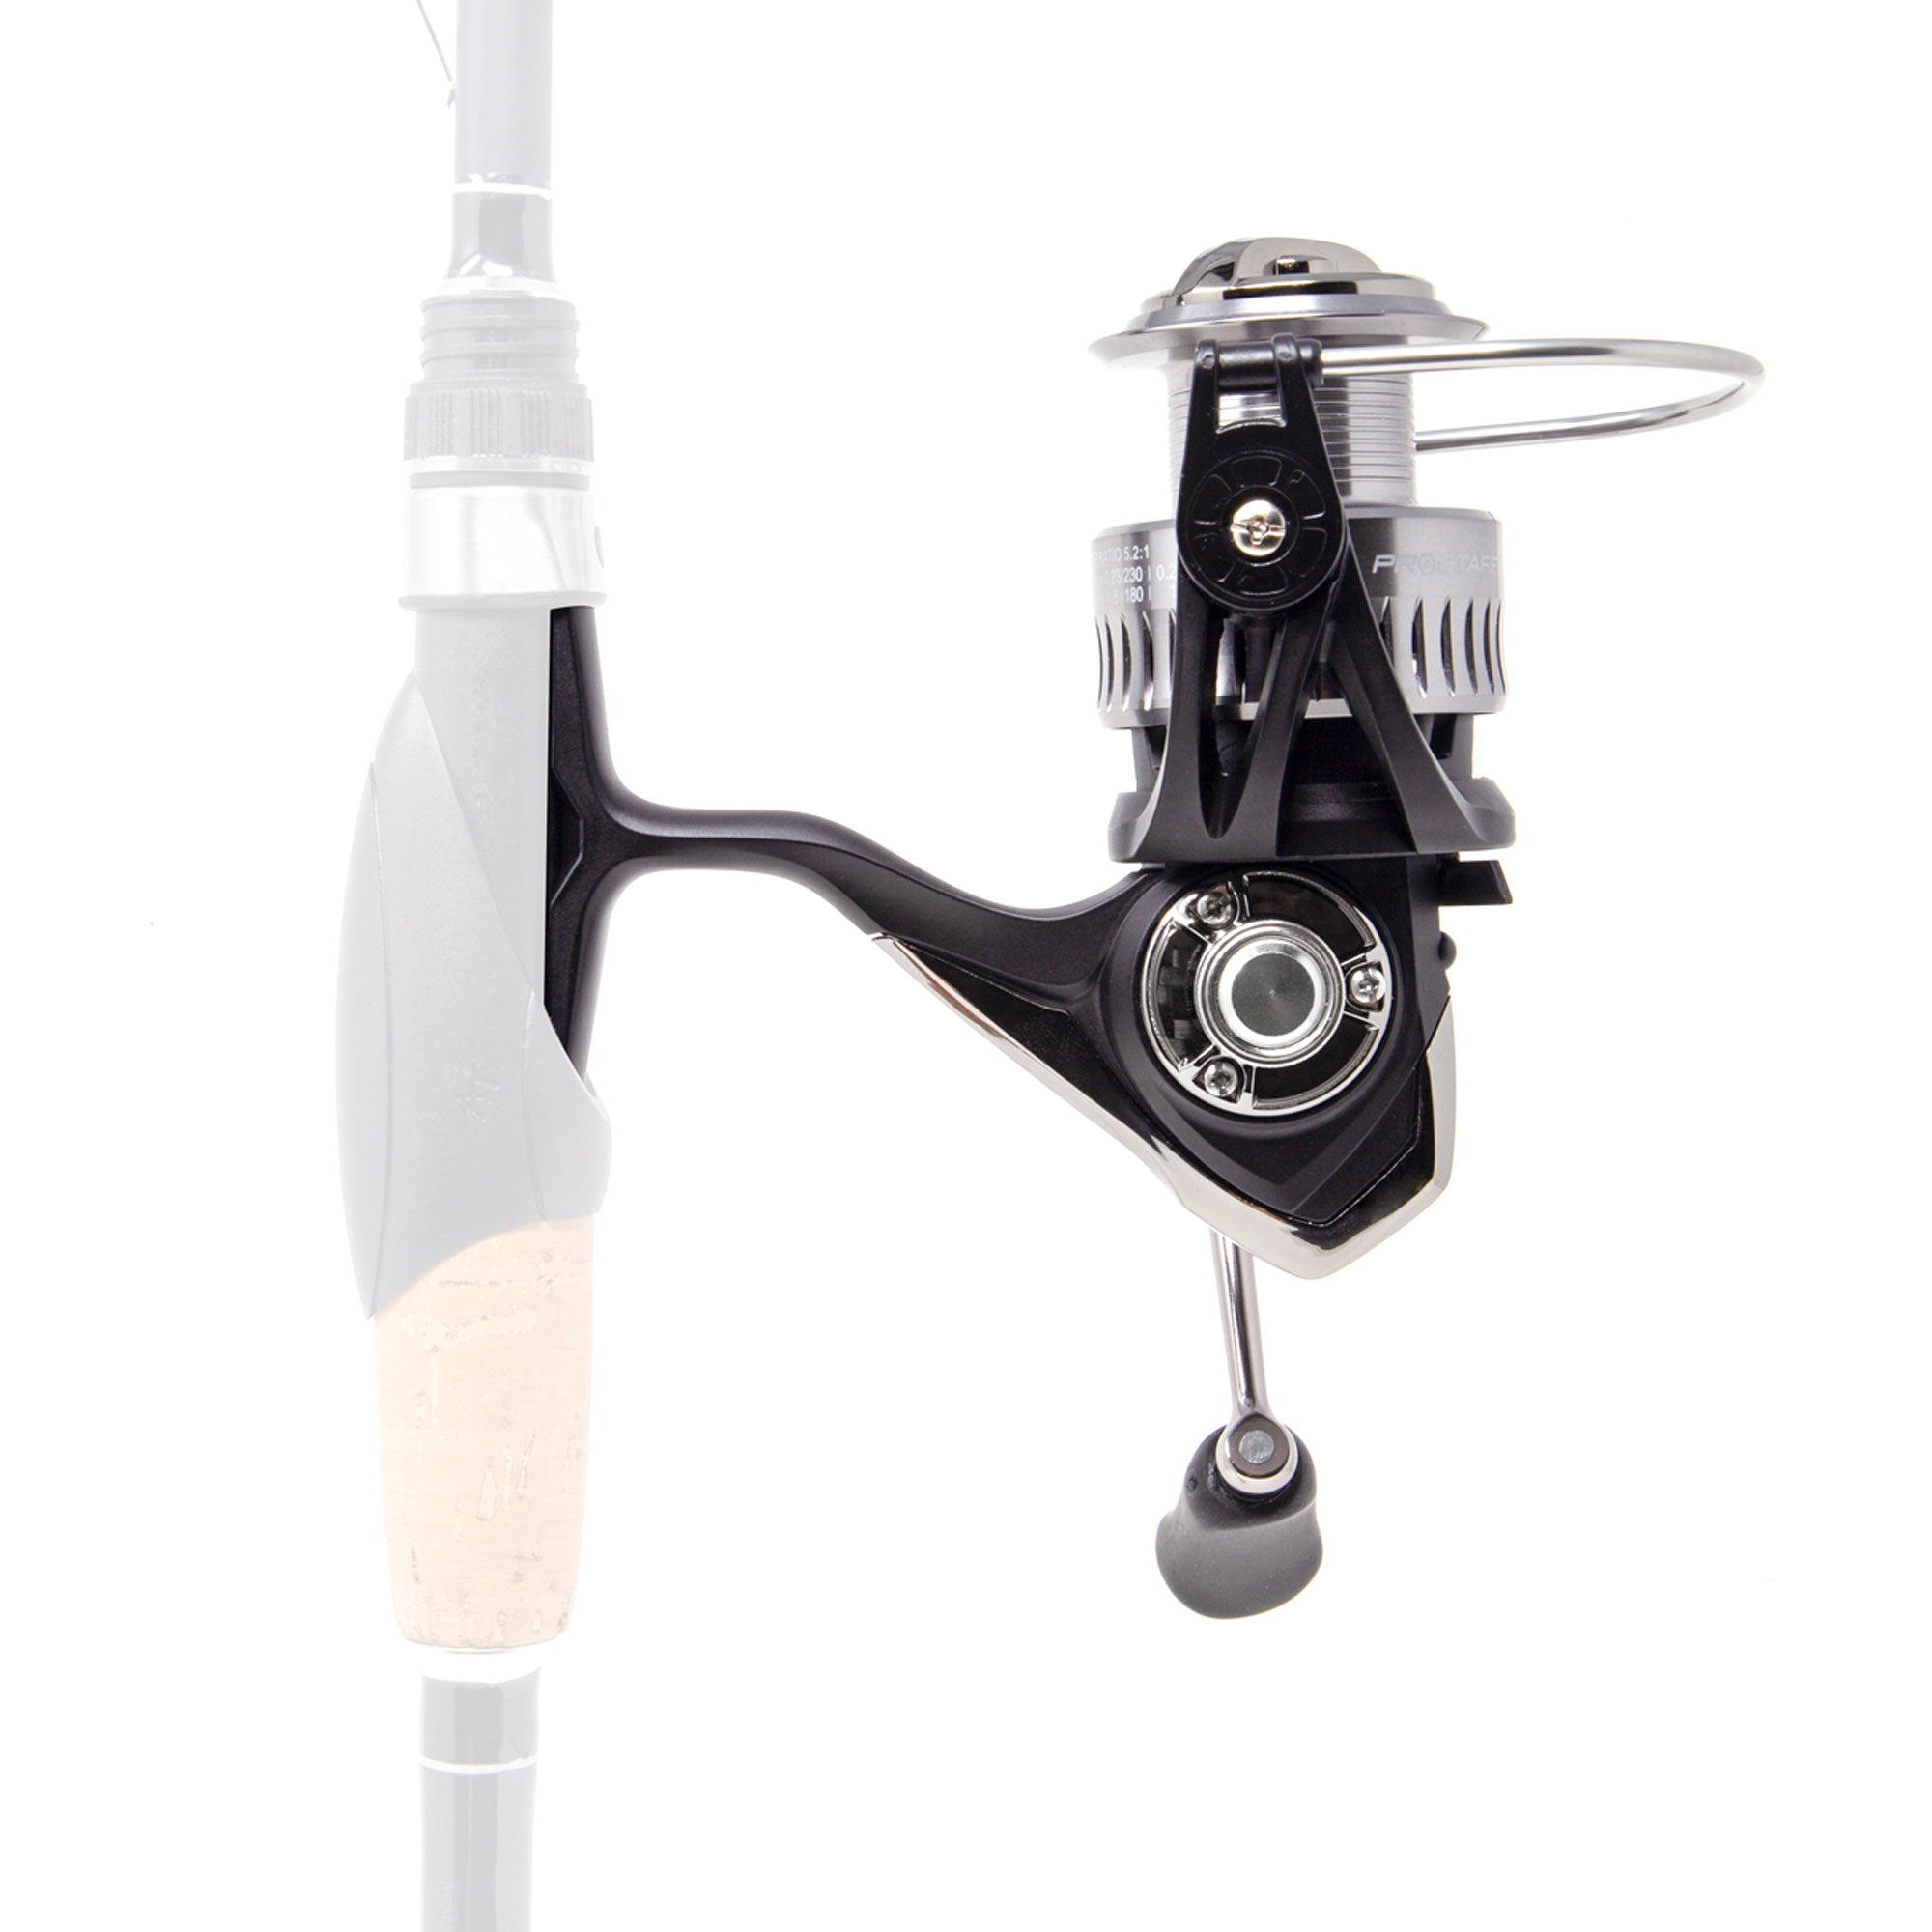 Mitchell spinning 3000 REEL MAG PRO R